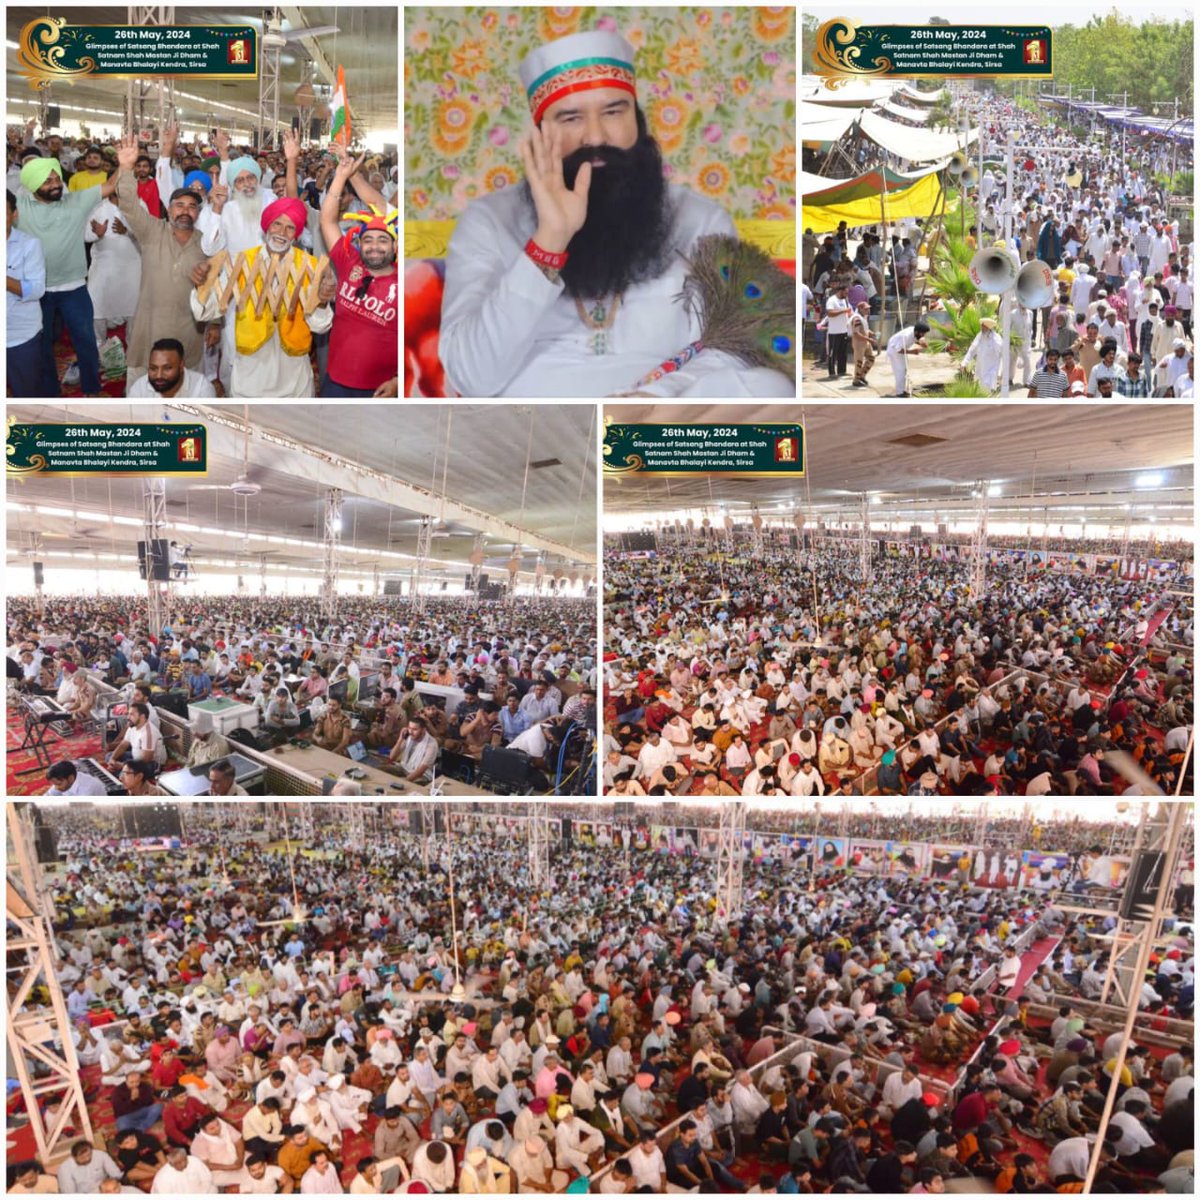 Today Satsang Bhandara was organized in Dera Sacha Sauda in which lakhs of followers participated enthusiastically. On the auspicious occasion of Bhandara, welfare work was done following the inspiration of Saint DR GURMEET Ram Rahim MSG Insan #SoulfulSatsangBhandara